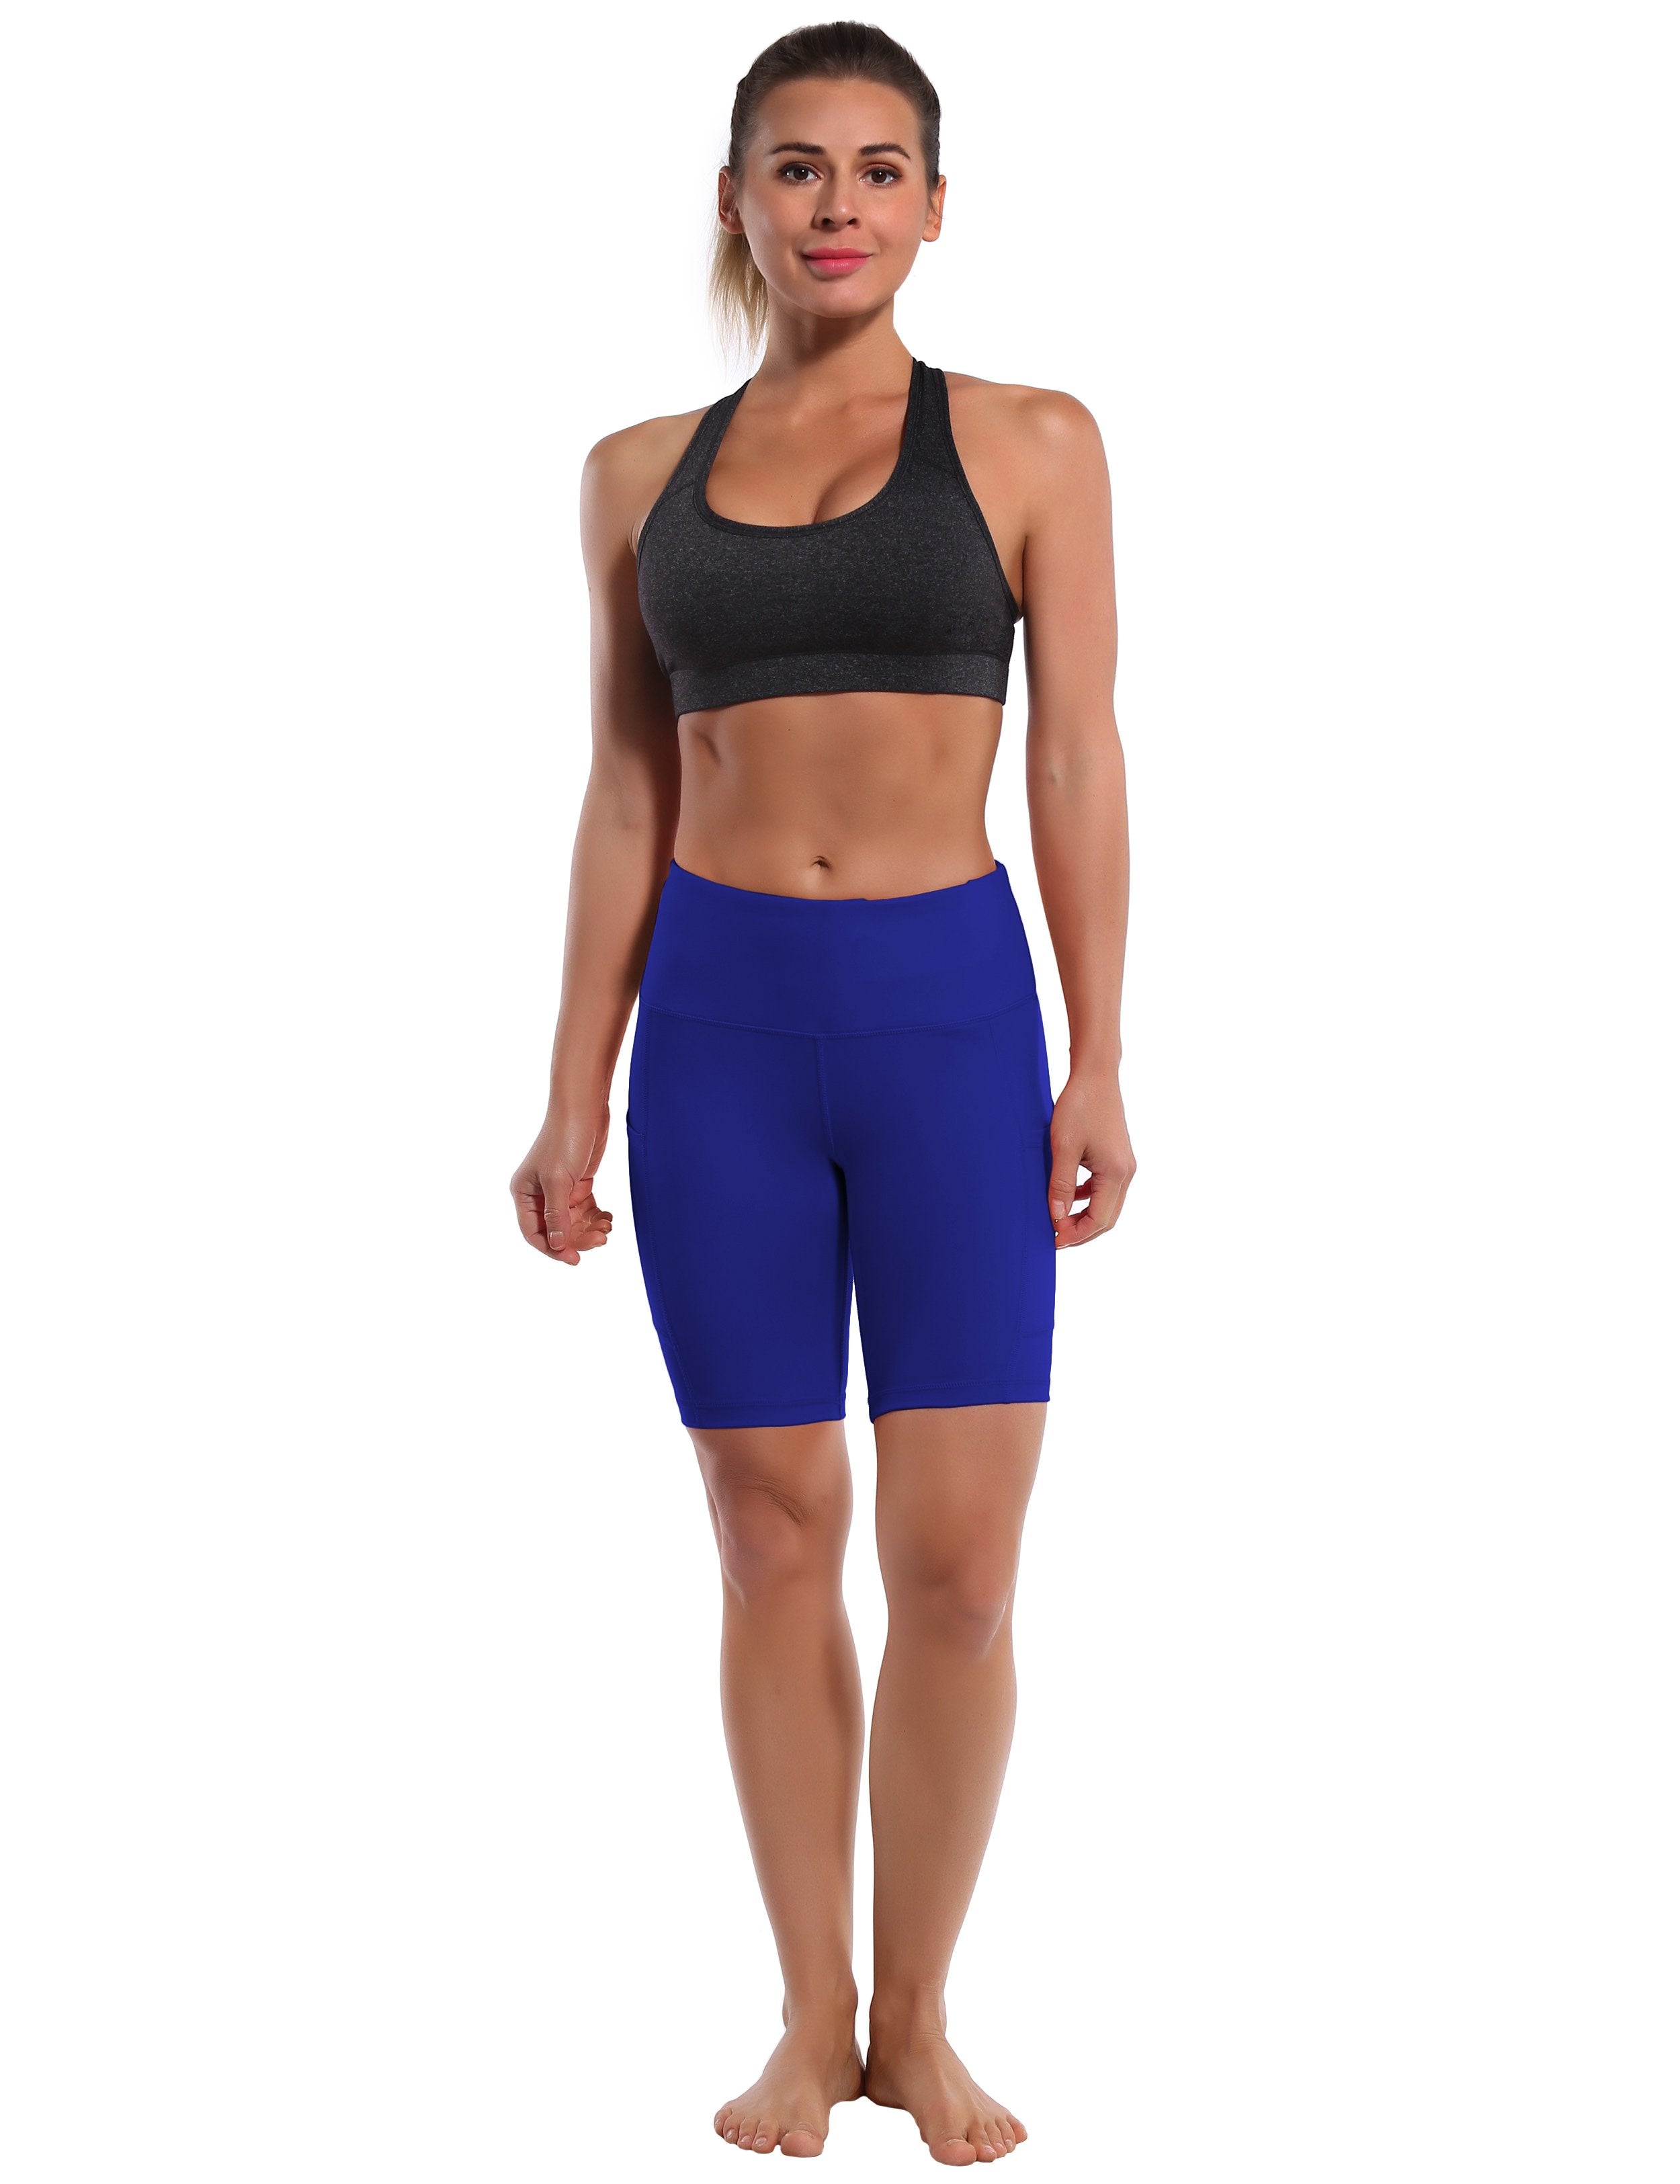 8" Side Pockets Pilates Shorts navy Sleek, soft, smooth and totally comfortable: our newest style is here. Softest-ever fabric High elasticity High density 4-way stretch Fabric doesn't attract lint easily No see-through Moisture-wicking Machine wash 75% Nylon, 25% Spandex